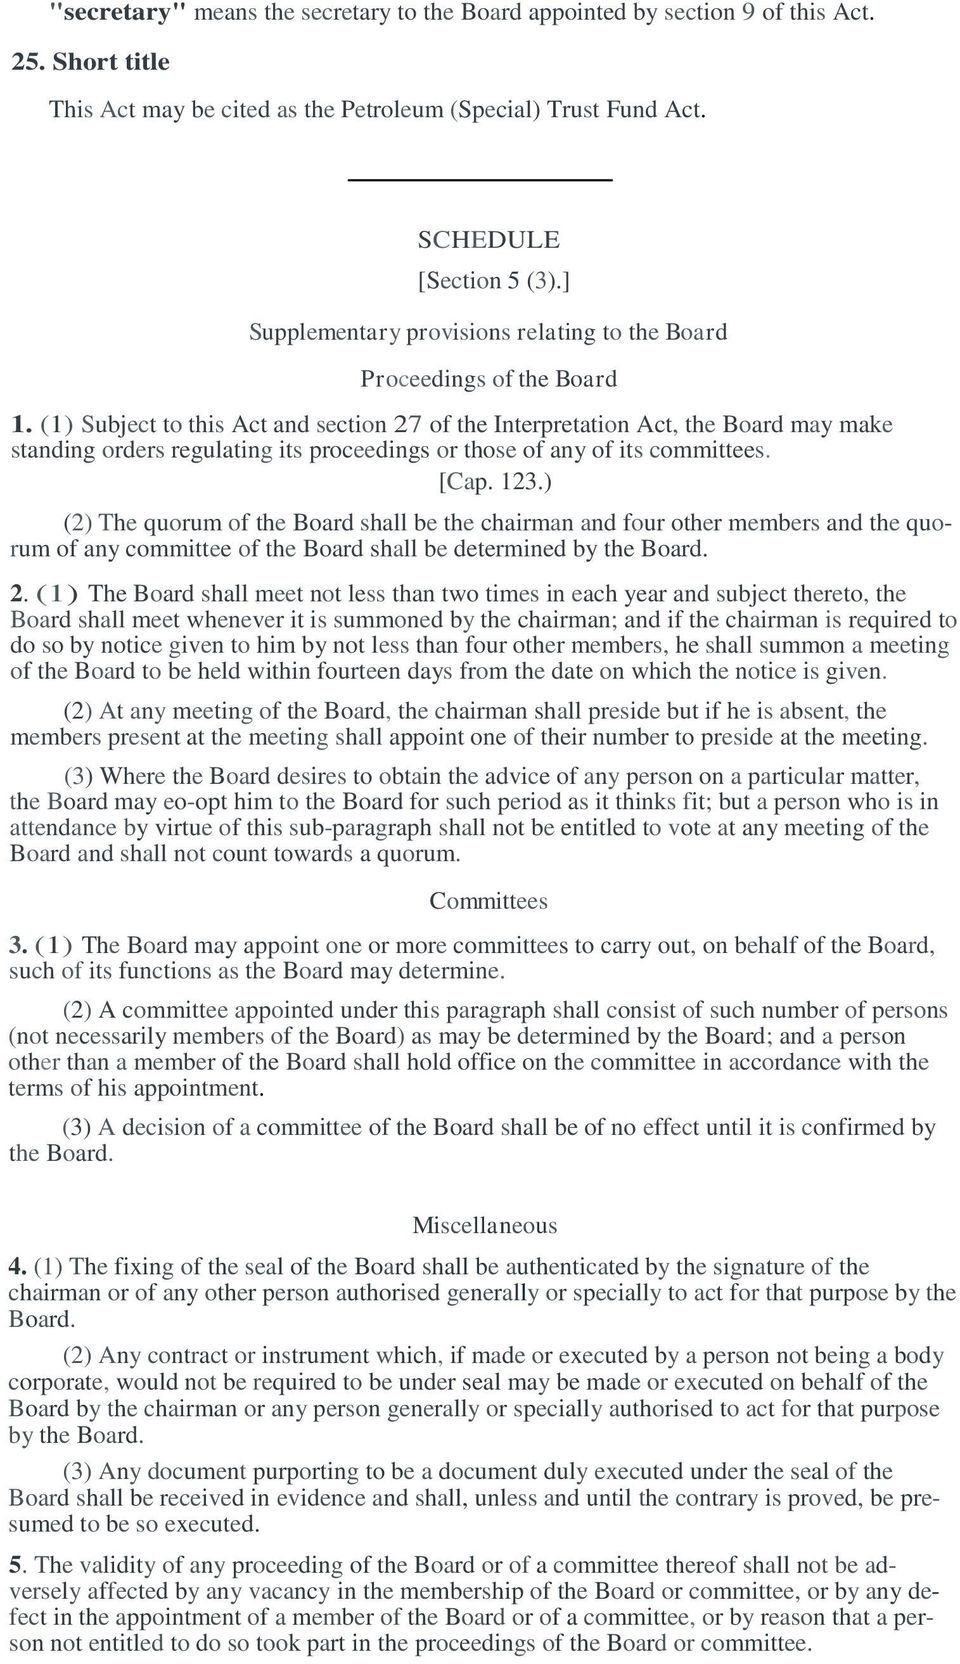 (1) Subject to this Act and section 27 of the Interpretation Act, the Board may make standing orders regulating its proceedings or those of any of its committees. [Cap. 123.